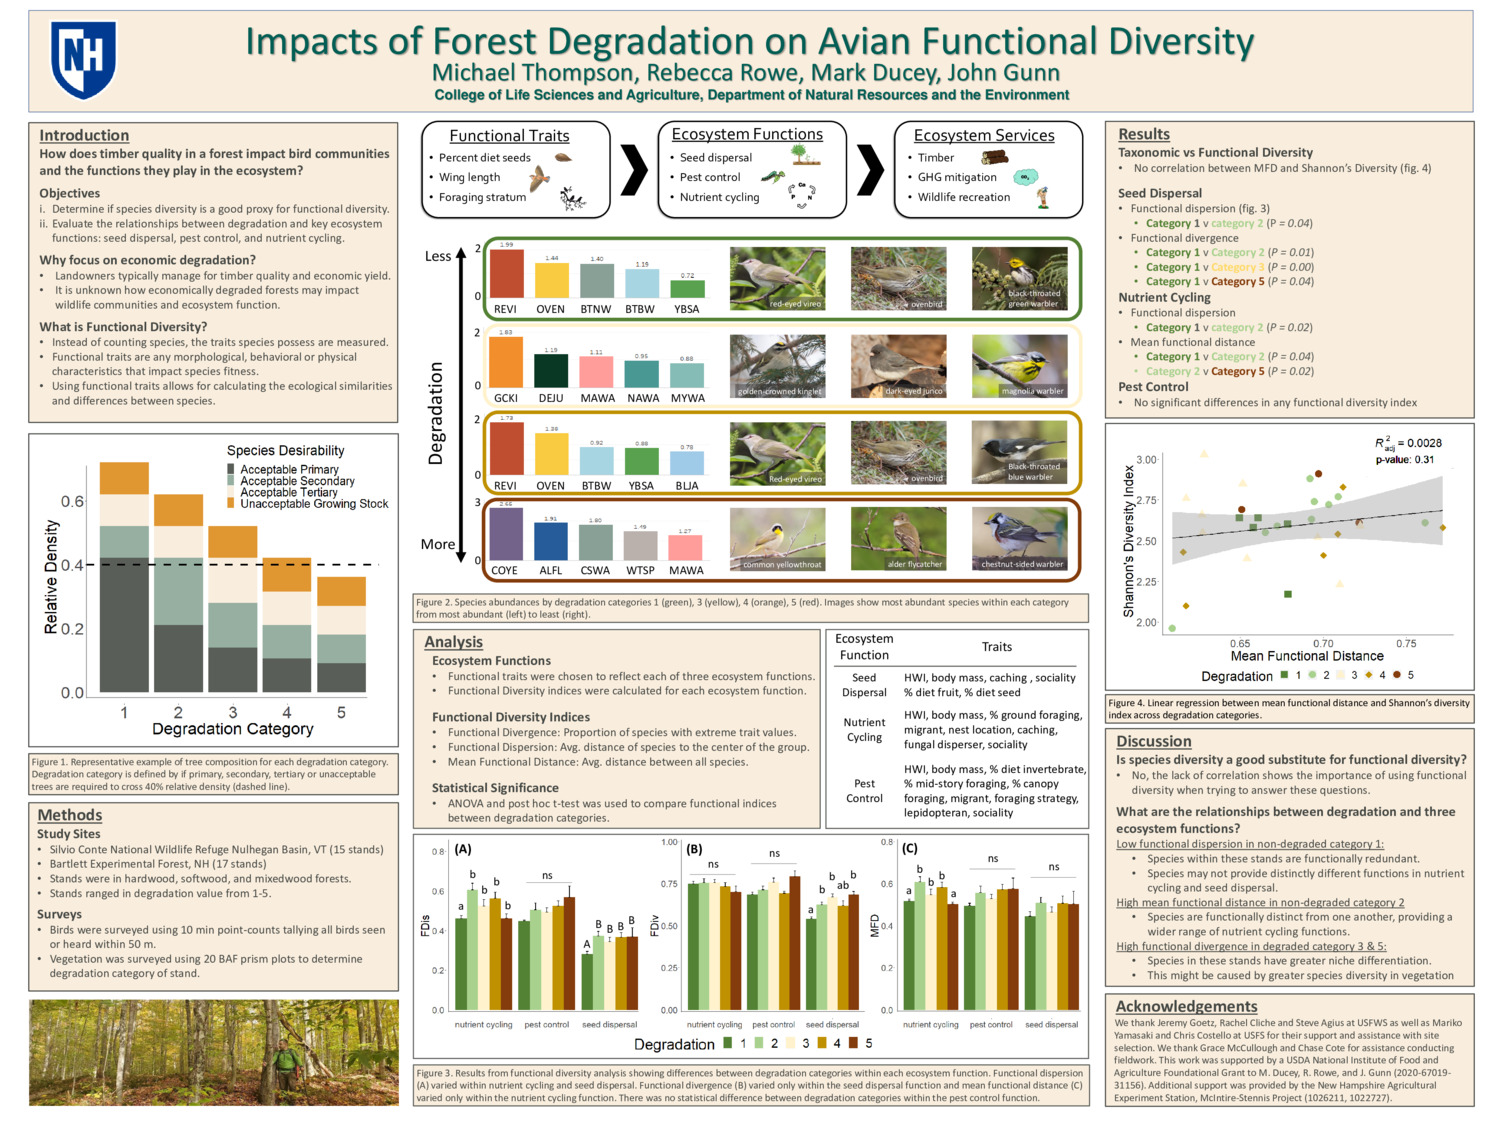 Impacts Of Forest Degradation On Avian Functional Diversity by mct1021